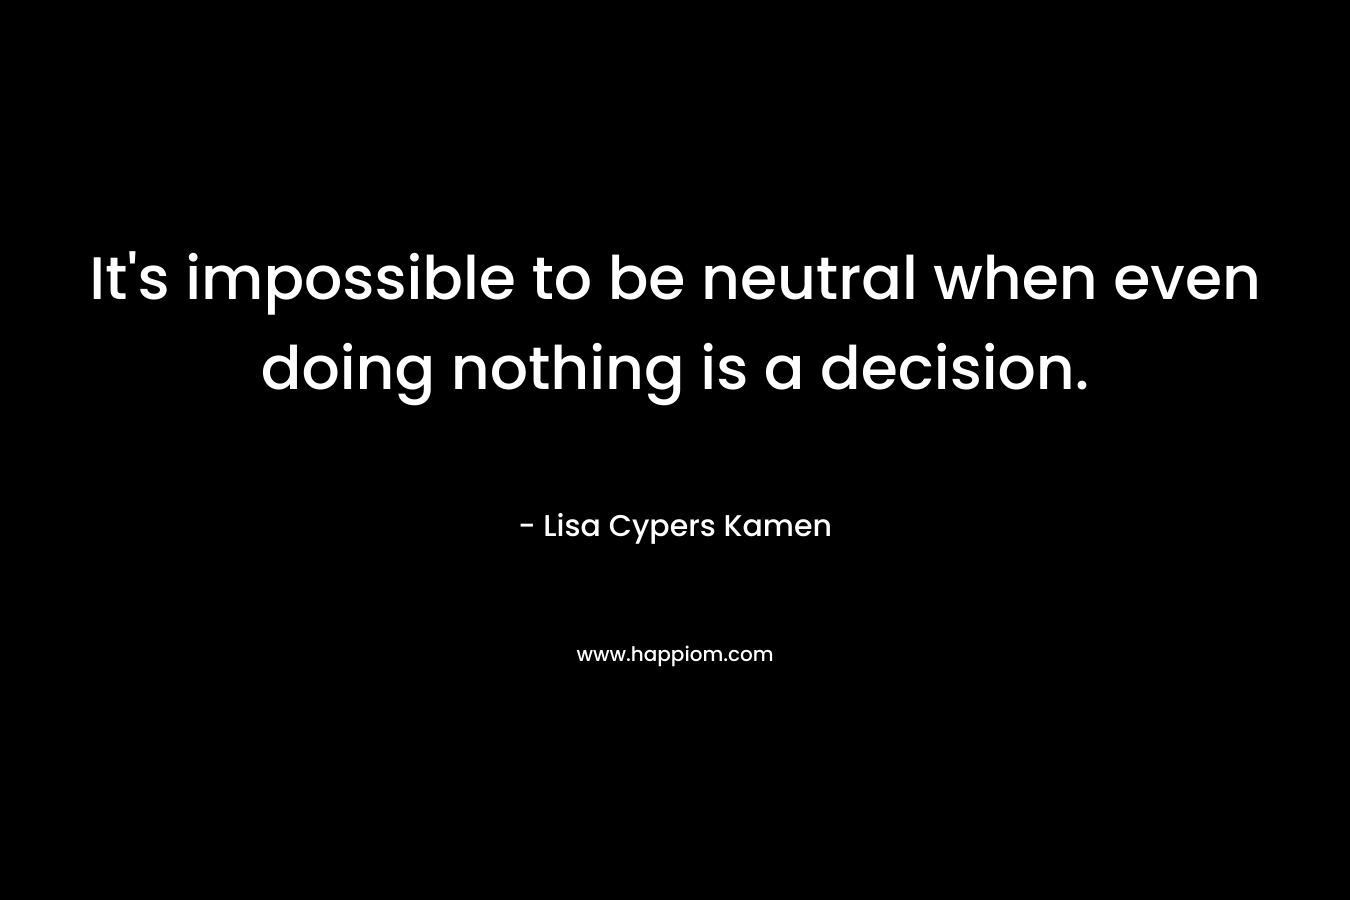 It's impossible to be neutral when even doing nothing is a decision.